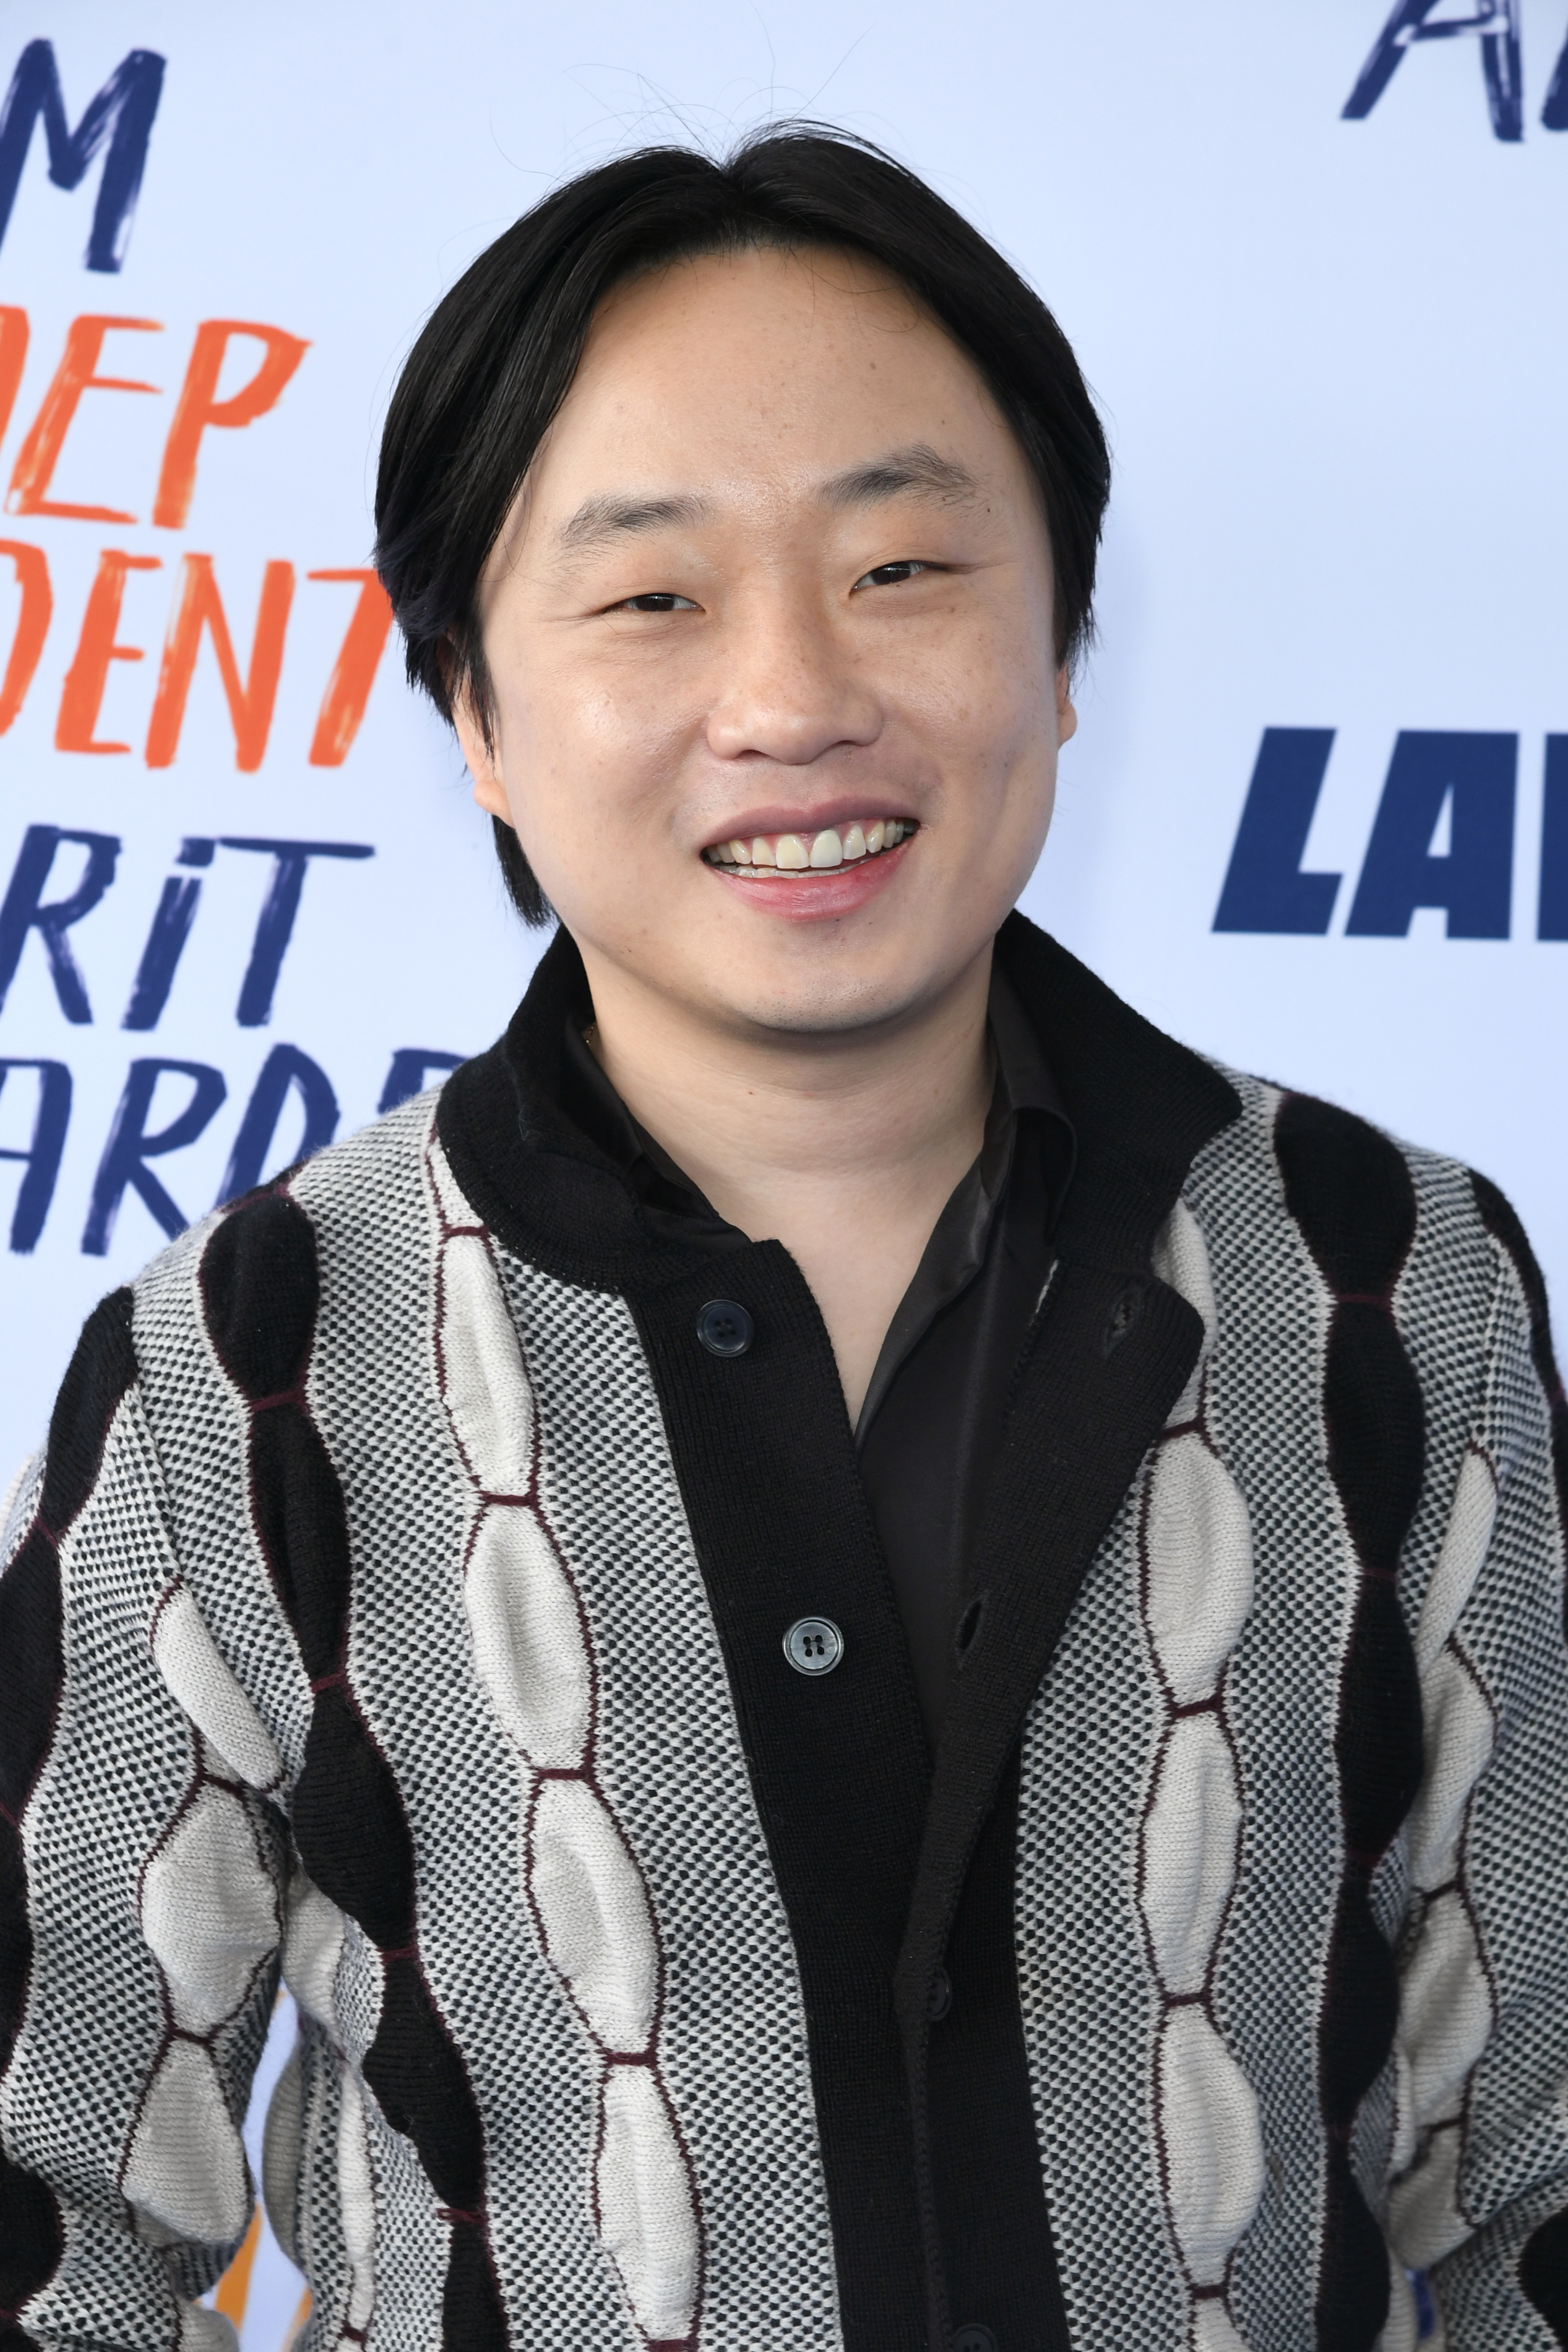 Jimmy O. Yang in patterned black and white jacket over black shirt smiles for camera at event